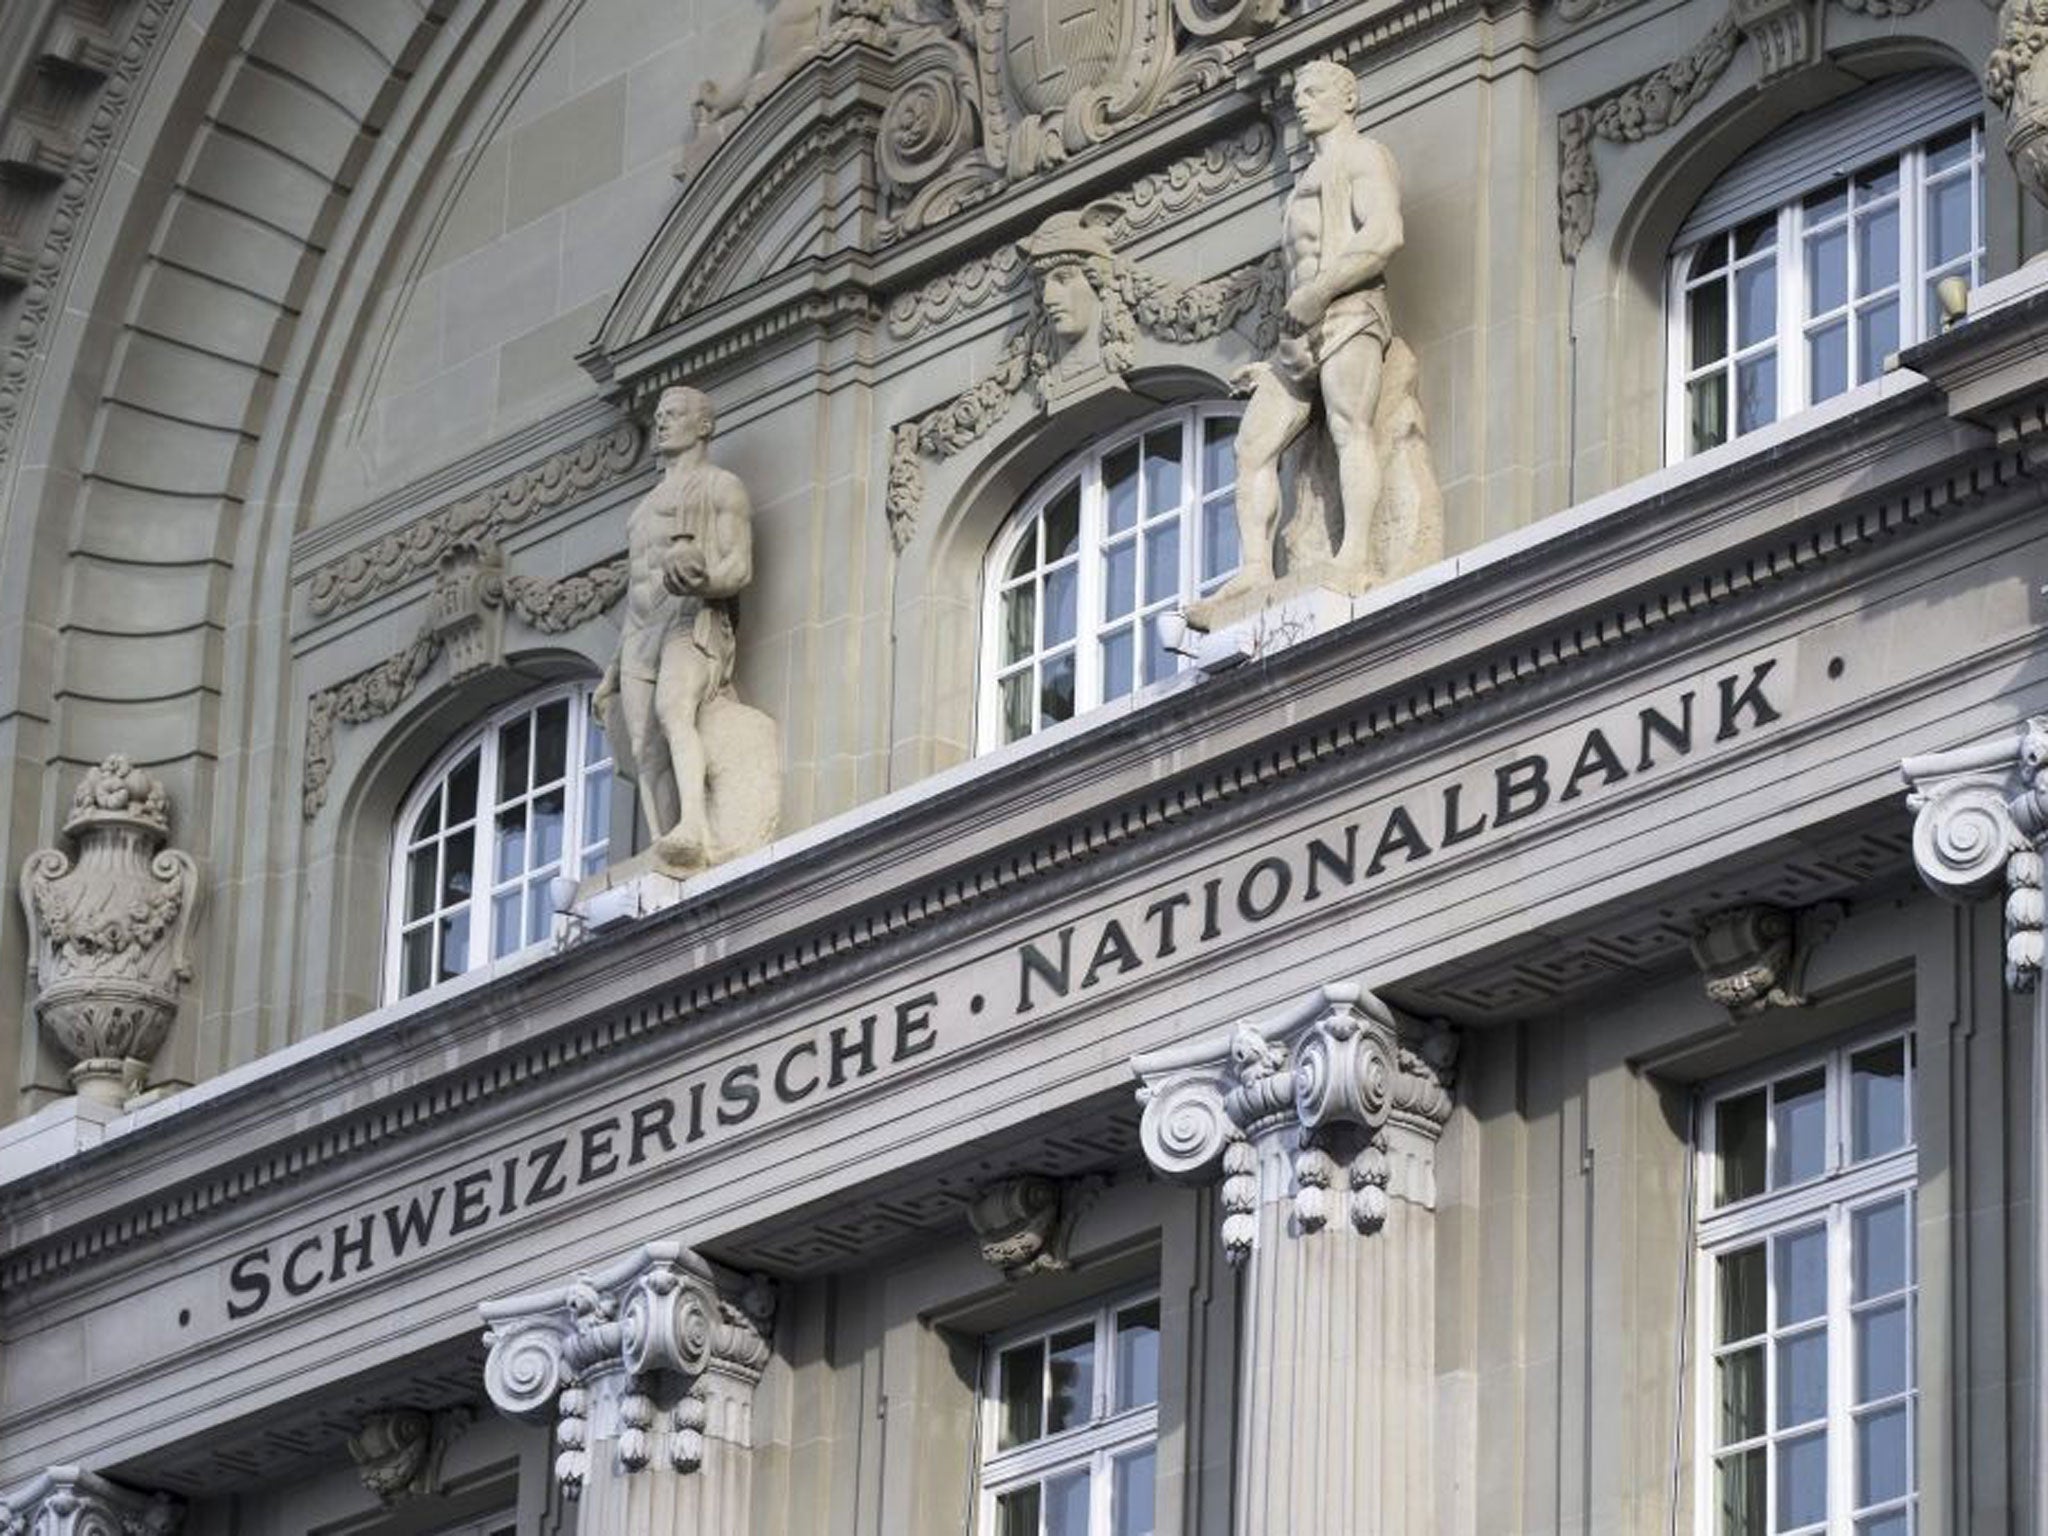 The Swiss National Bank set a ceiling on the Swiss franc in response to large in-flows of capital following the financial crisis